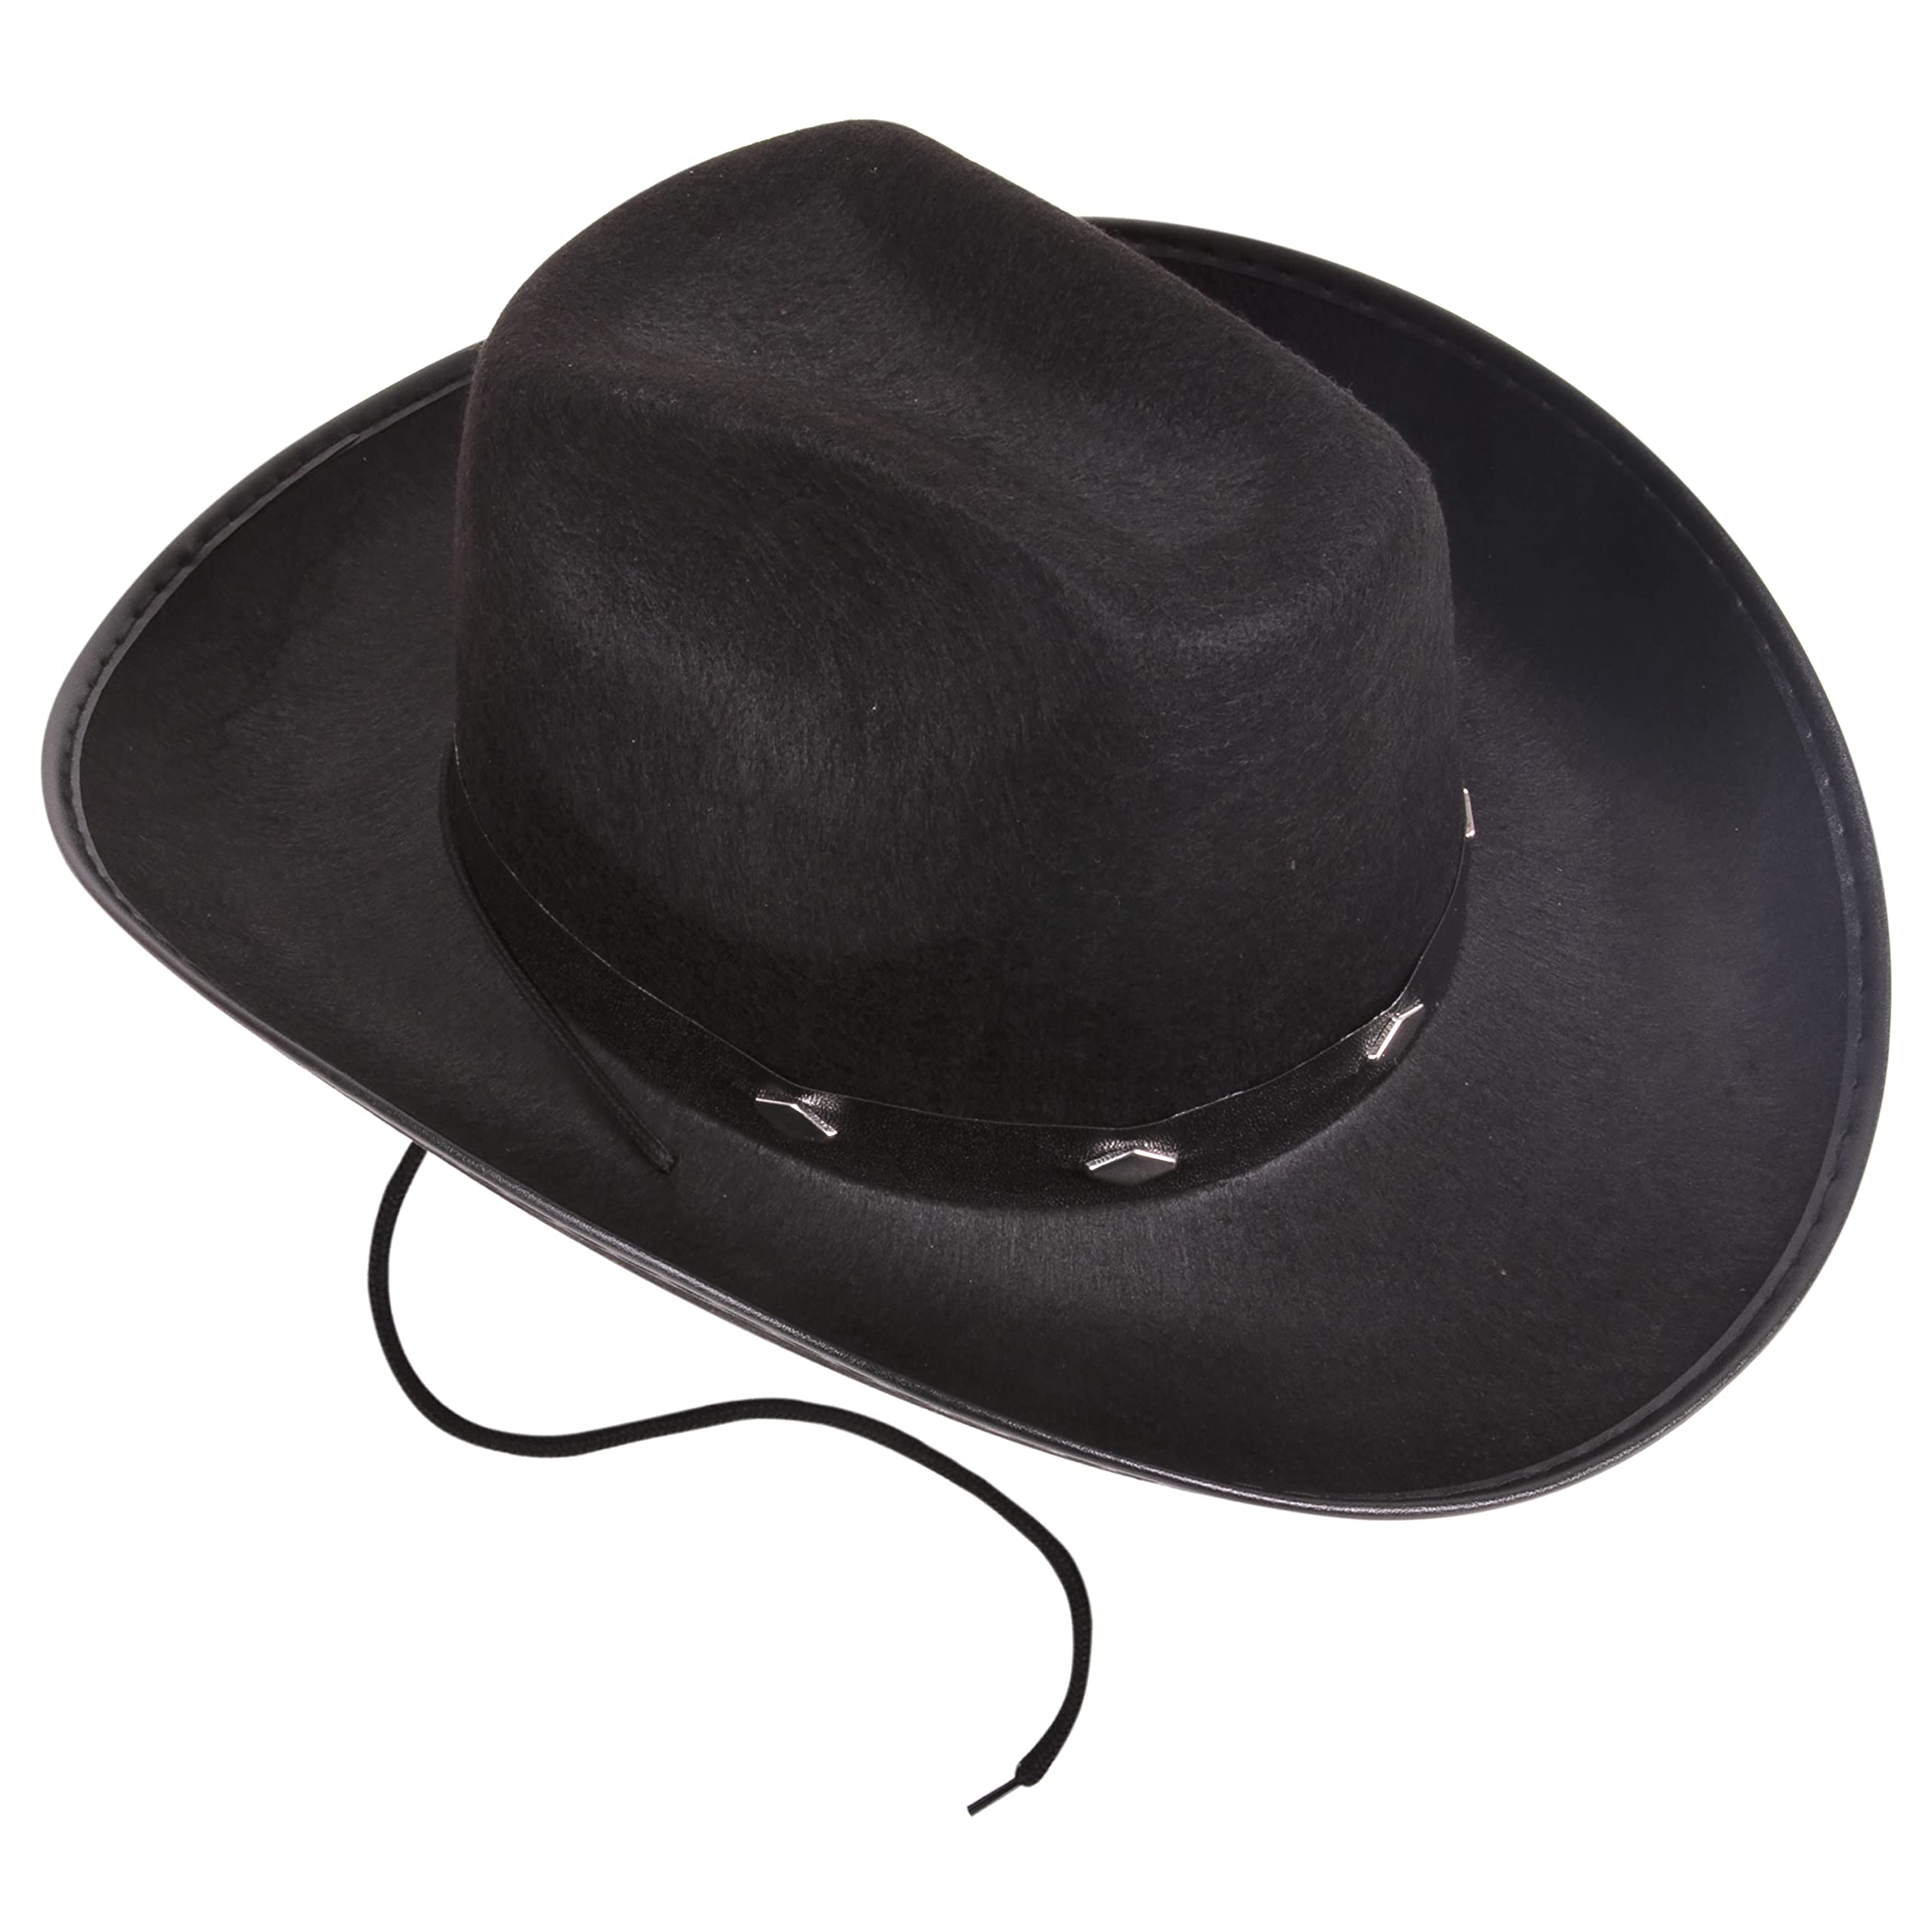 Kangaroo - Cowboy Hat with Pull-on Closure, Felt Cowboy Hat for Real Cowboys or Costume Party - Adult’s Cowboy & Cowgirl Hat